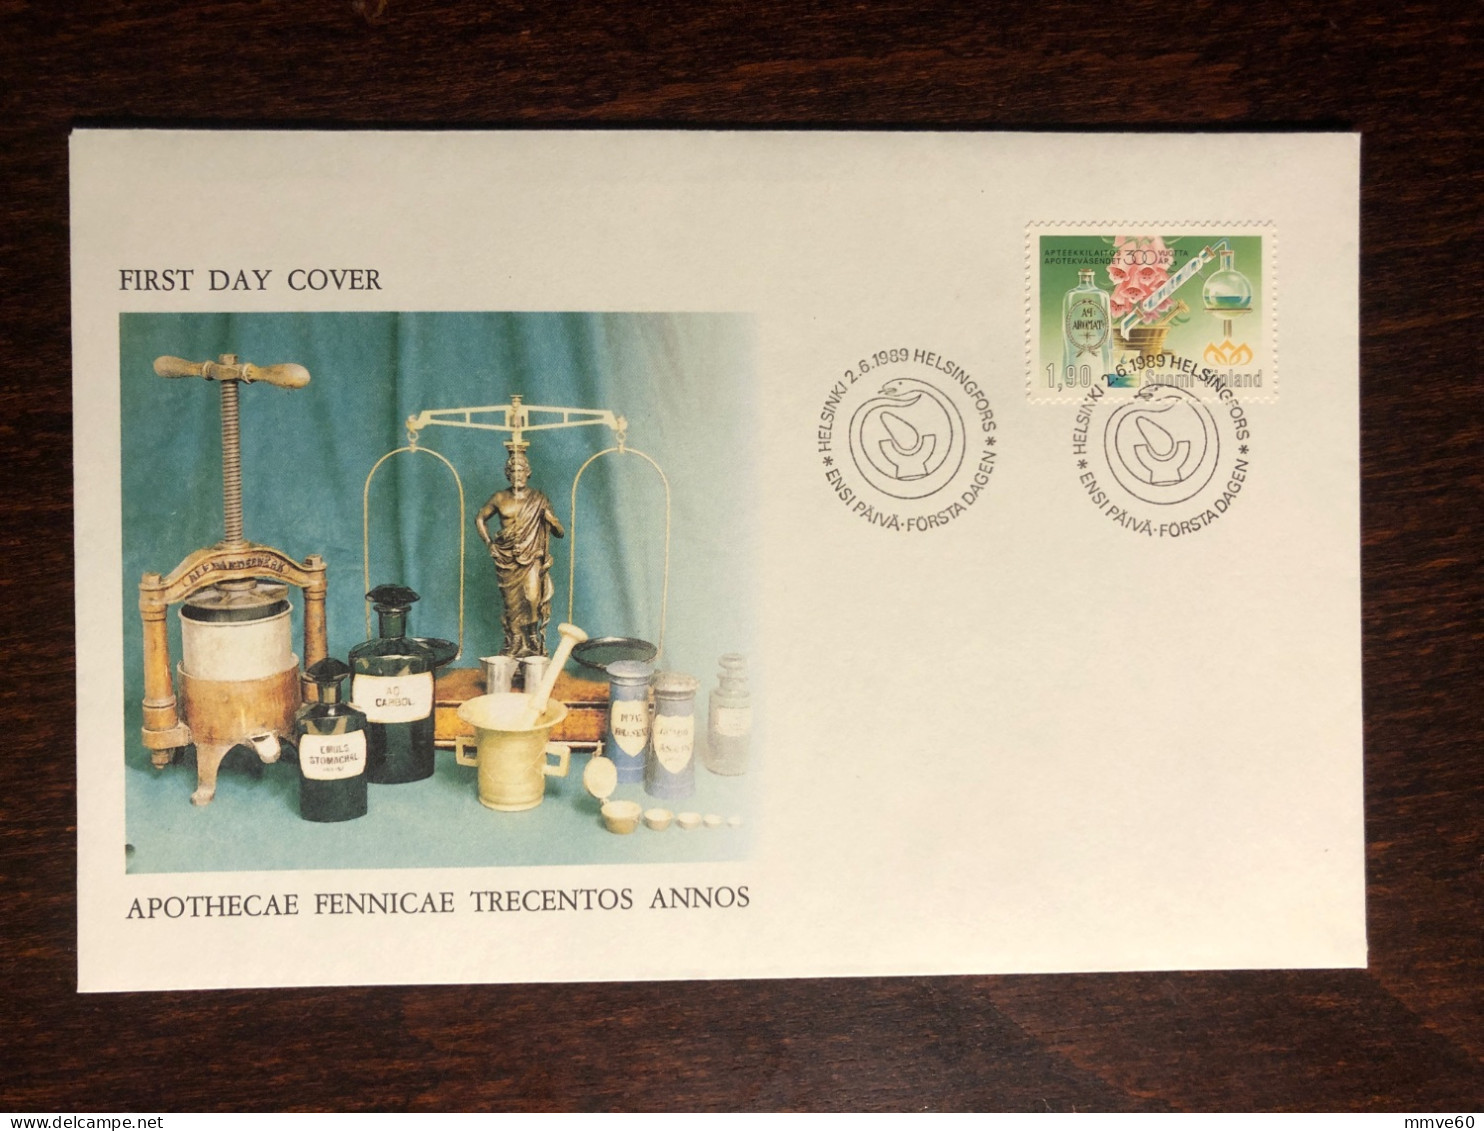 FINLAND FDC COVER 1989 YEAR PHARMACY PHARMACOLOGY HEALTH MEDICINE STAMPS - Lettres & Documents